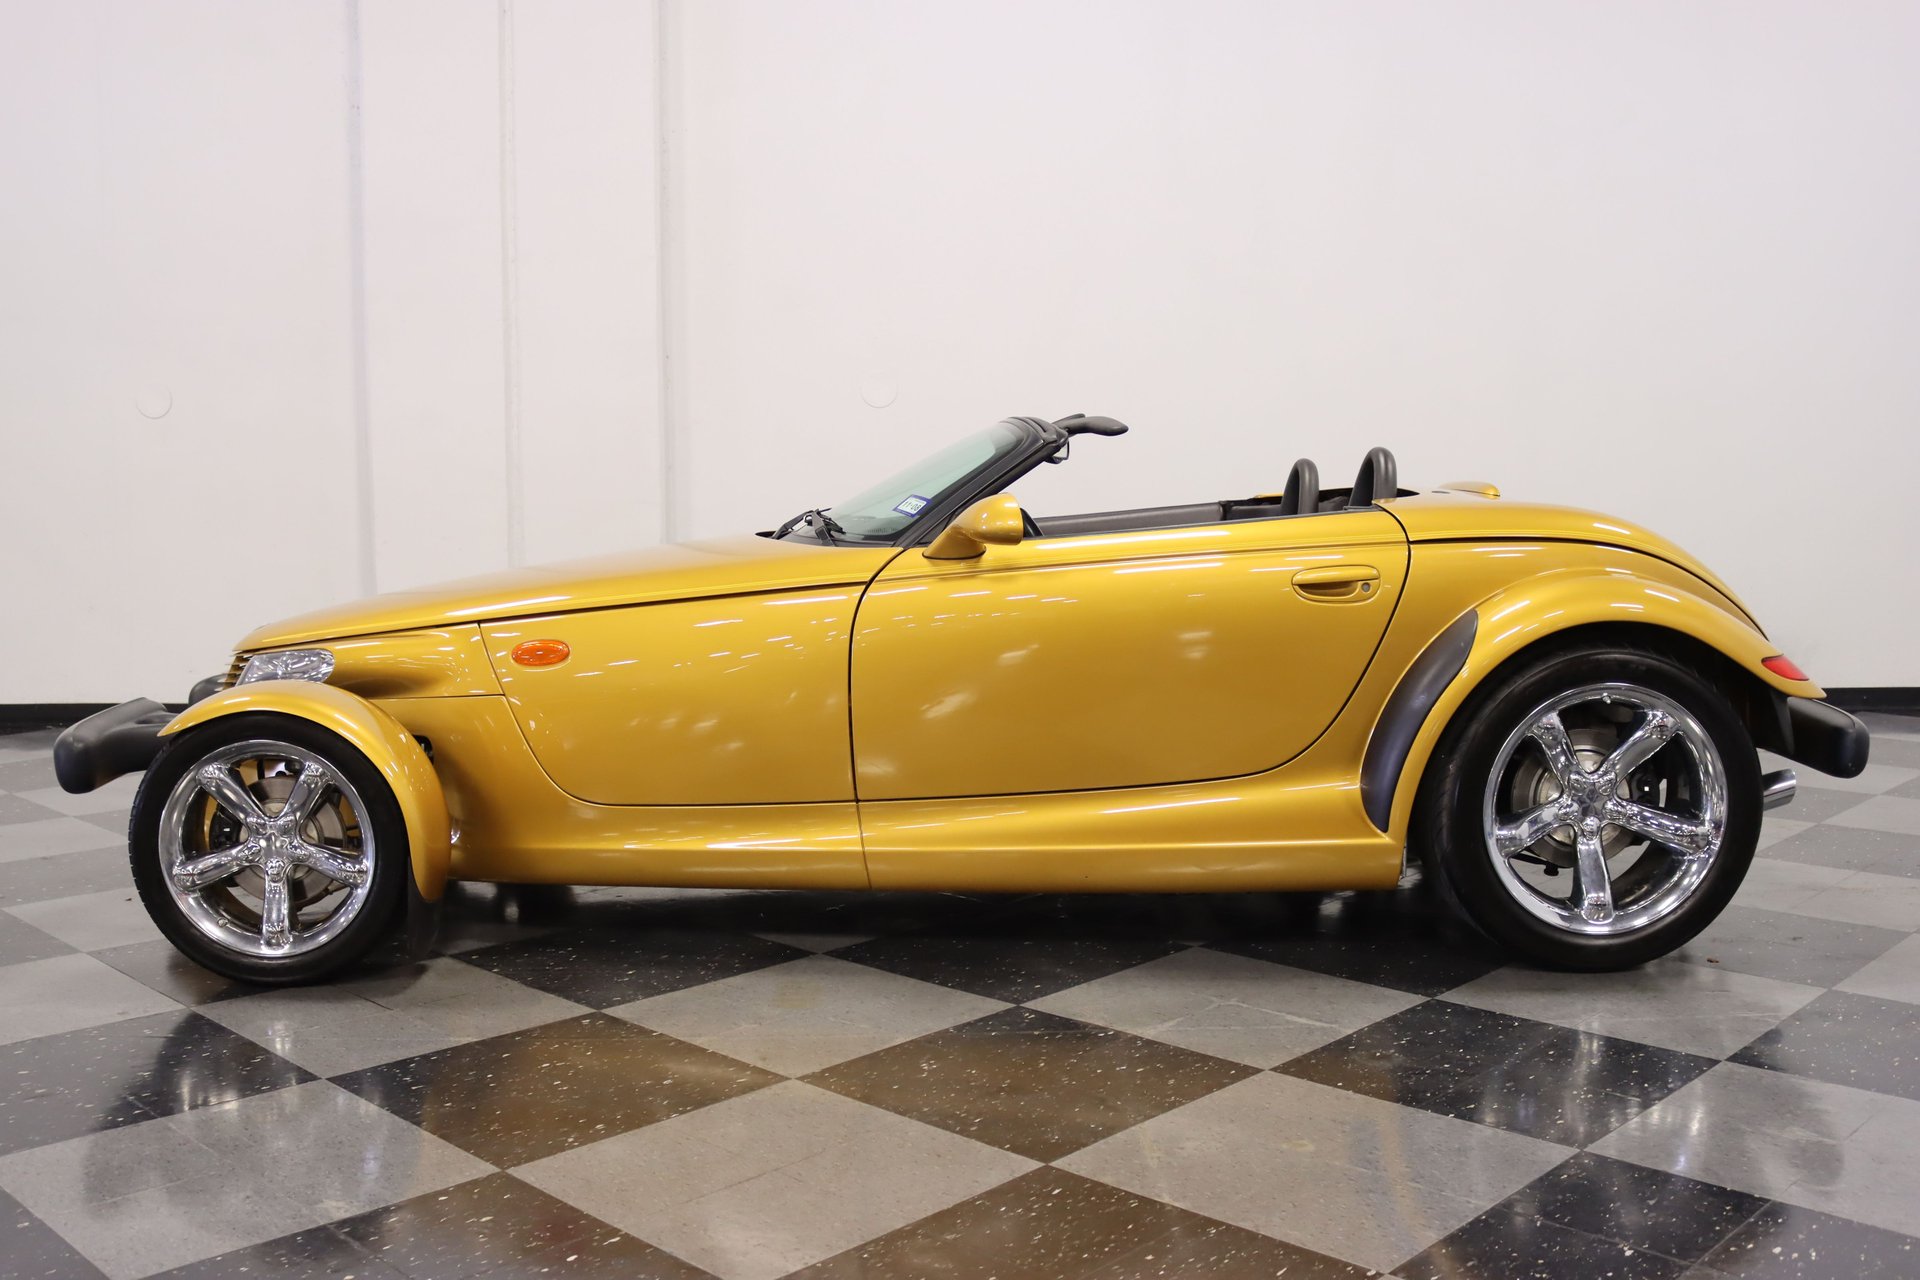 2002 chrysler prowler with matching trailer